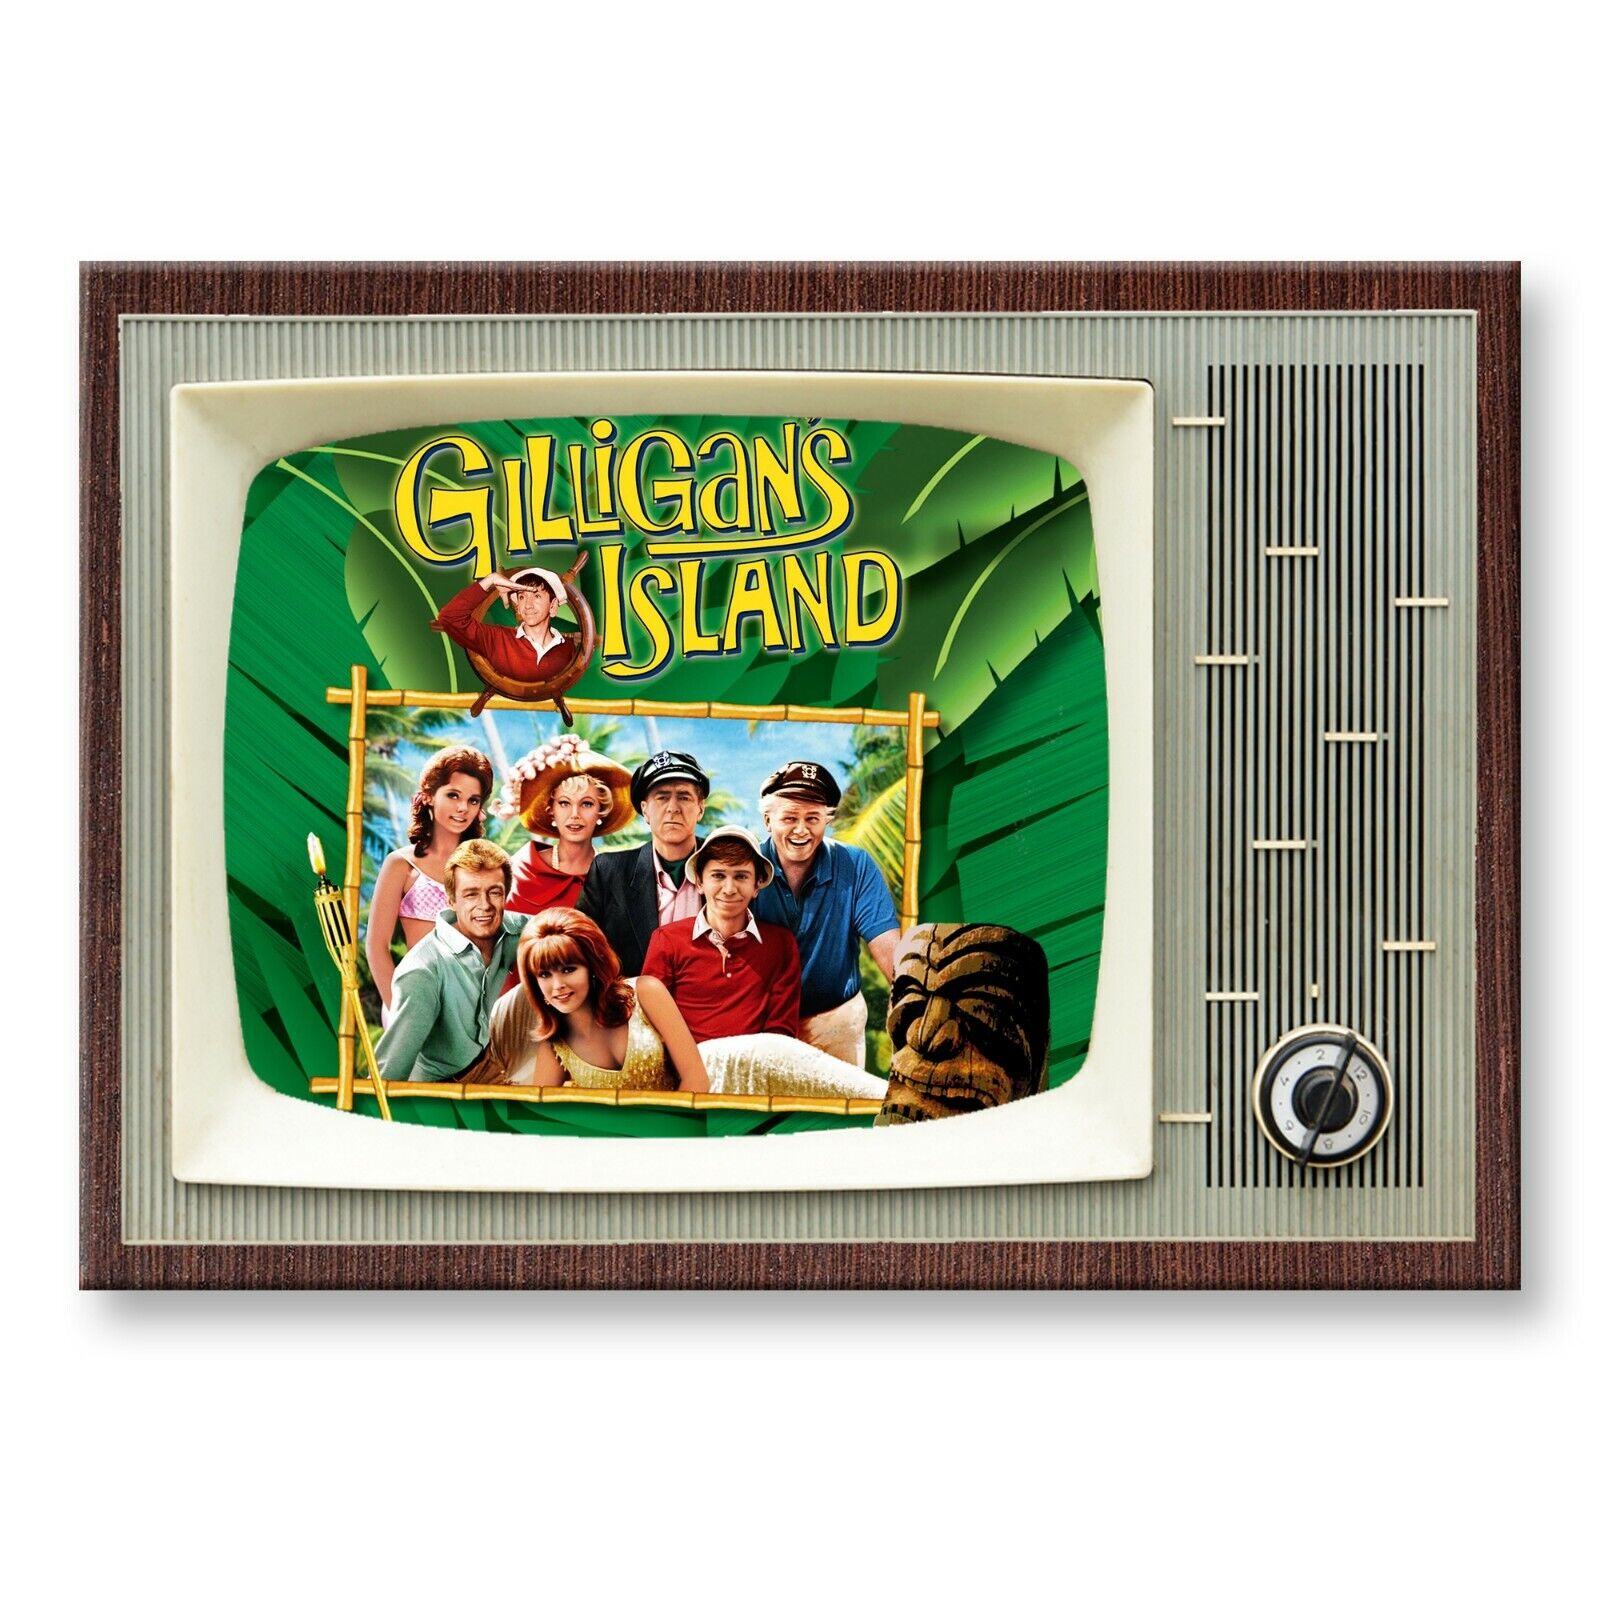 GILLIGANS ISLAND TV Show Classic TV 3.5 inches x 2.5 inches Steel FRIDGE MAGNET